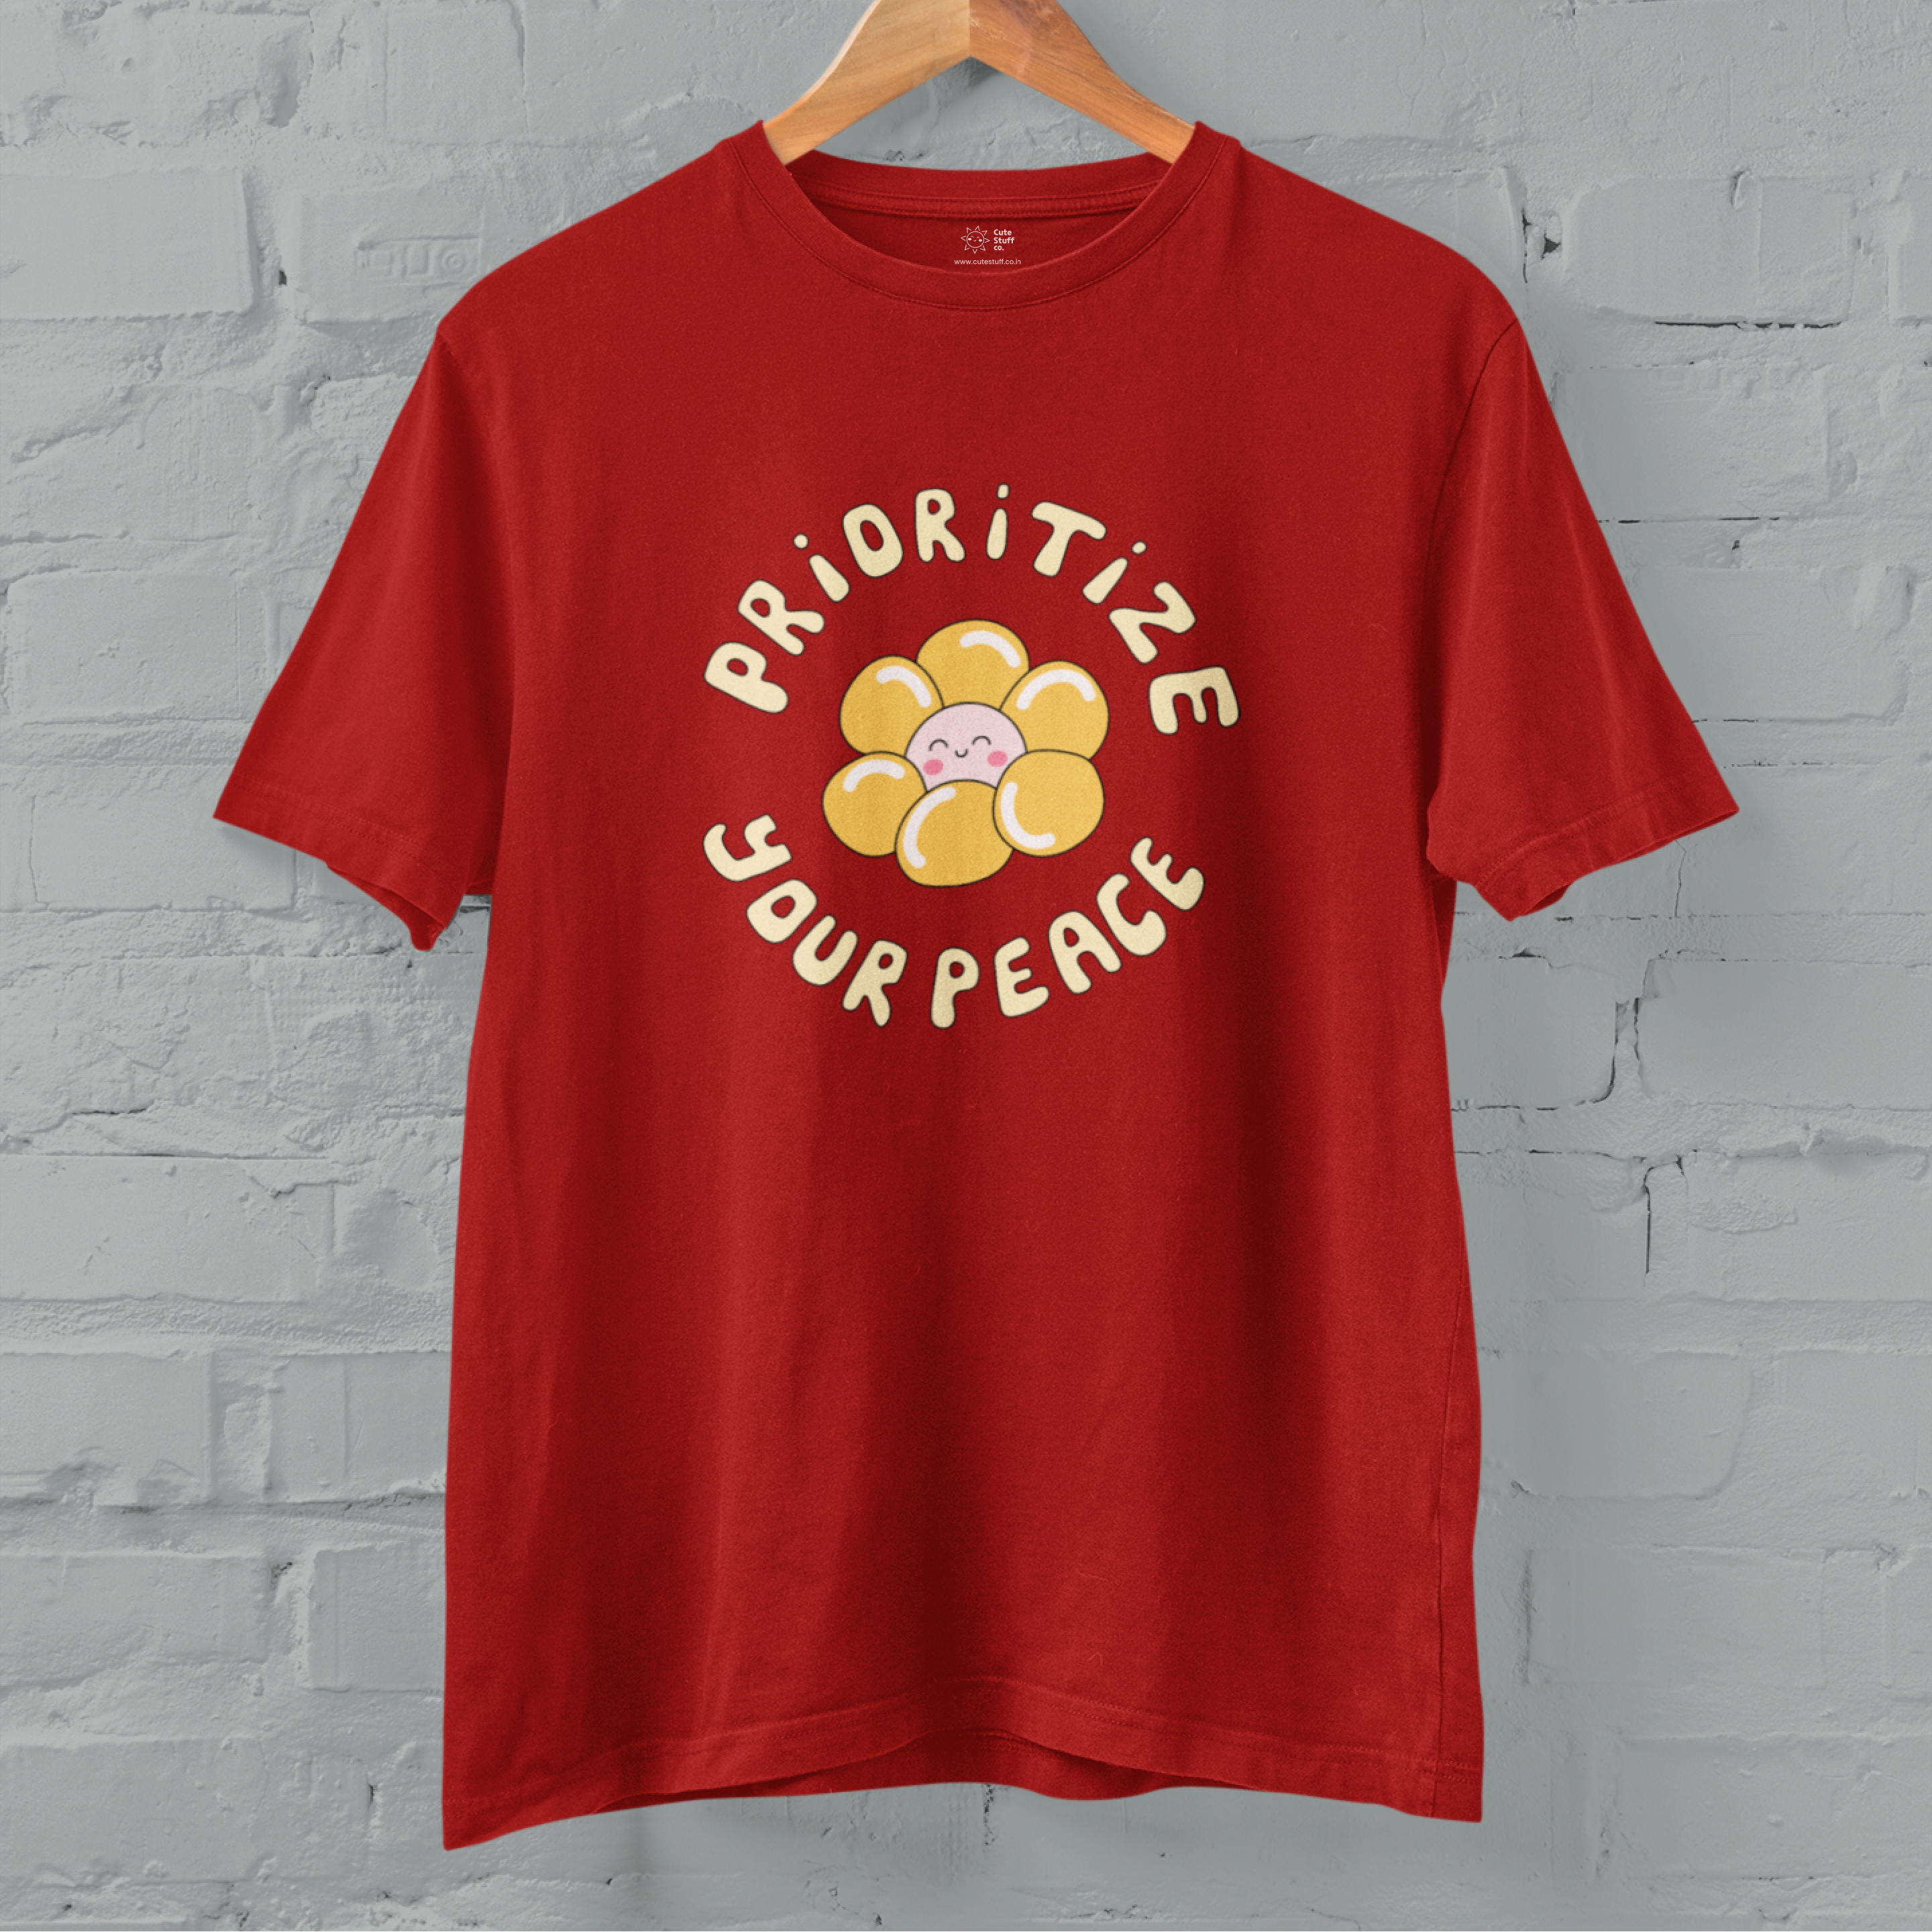 Prioritize Your Peace- Unisex Tshirt- floral- Protect Your Peace